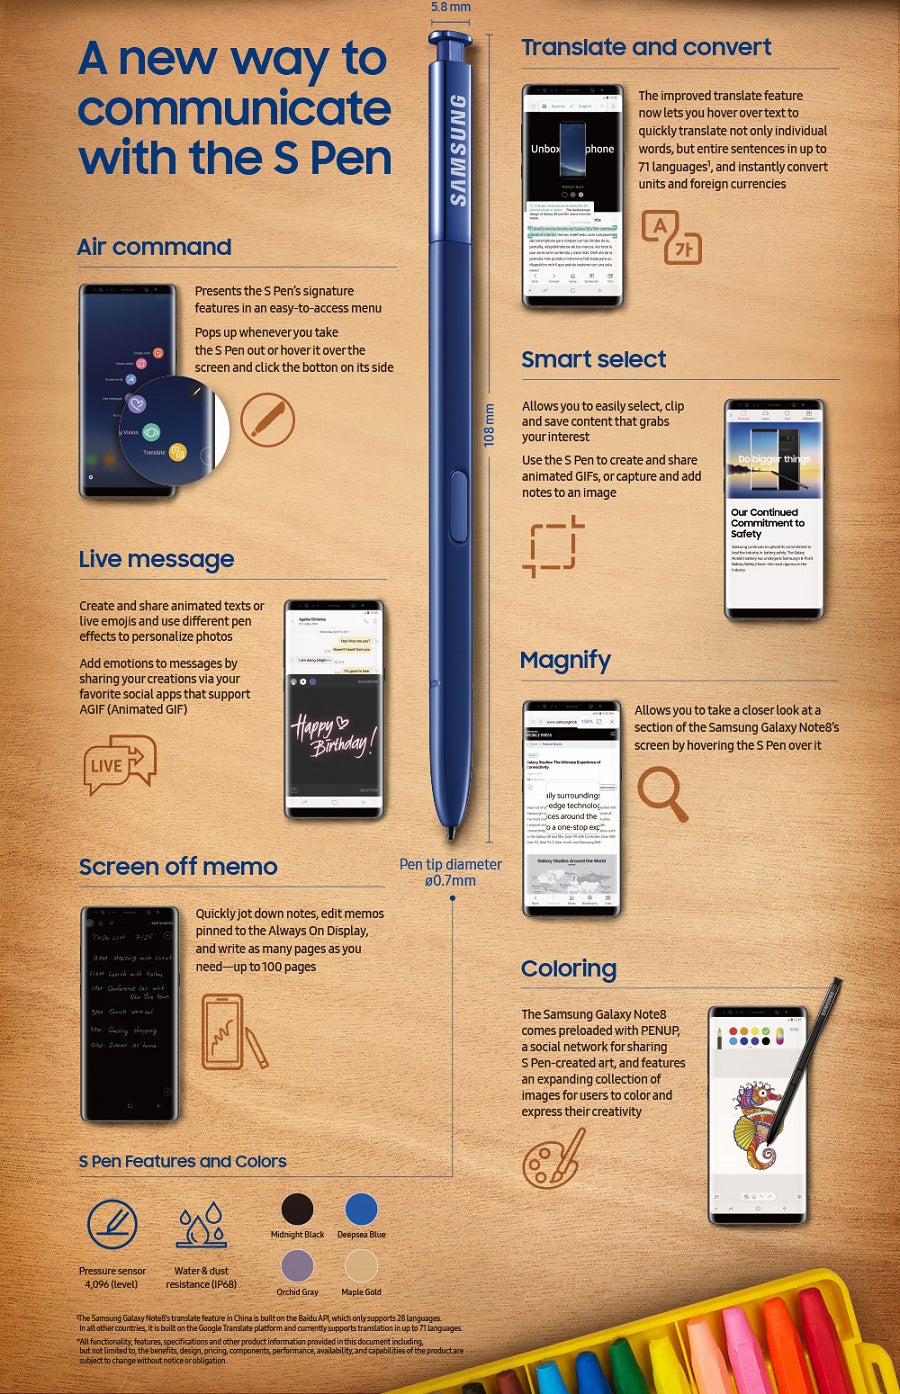 Samsung Galaxy Note 8 S Pen: all new features